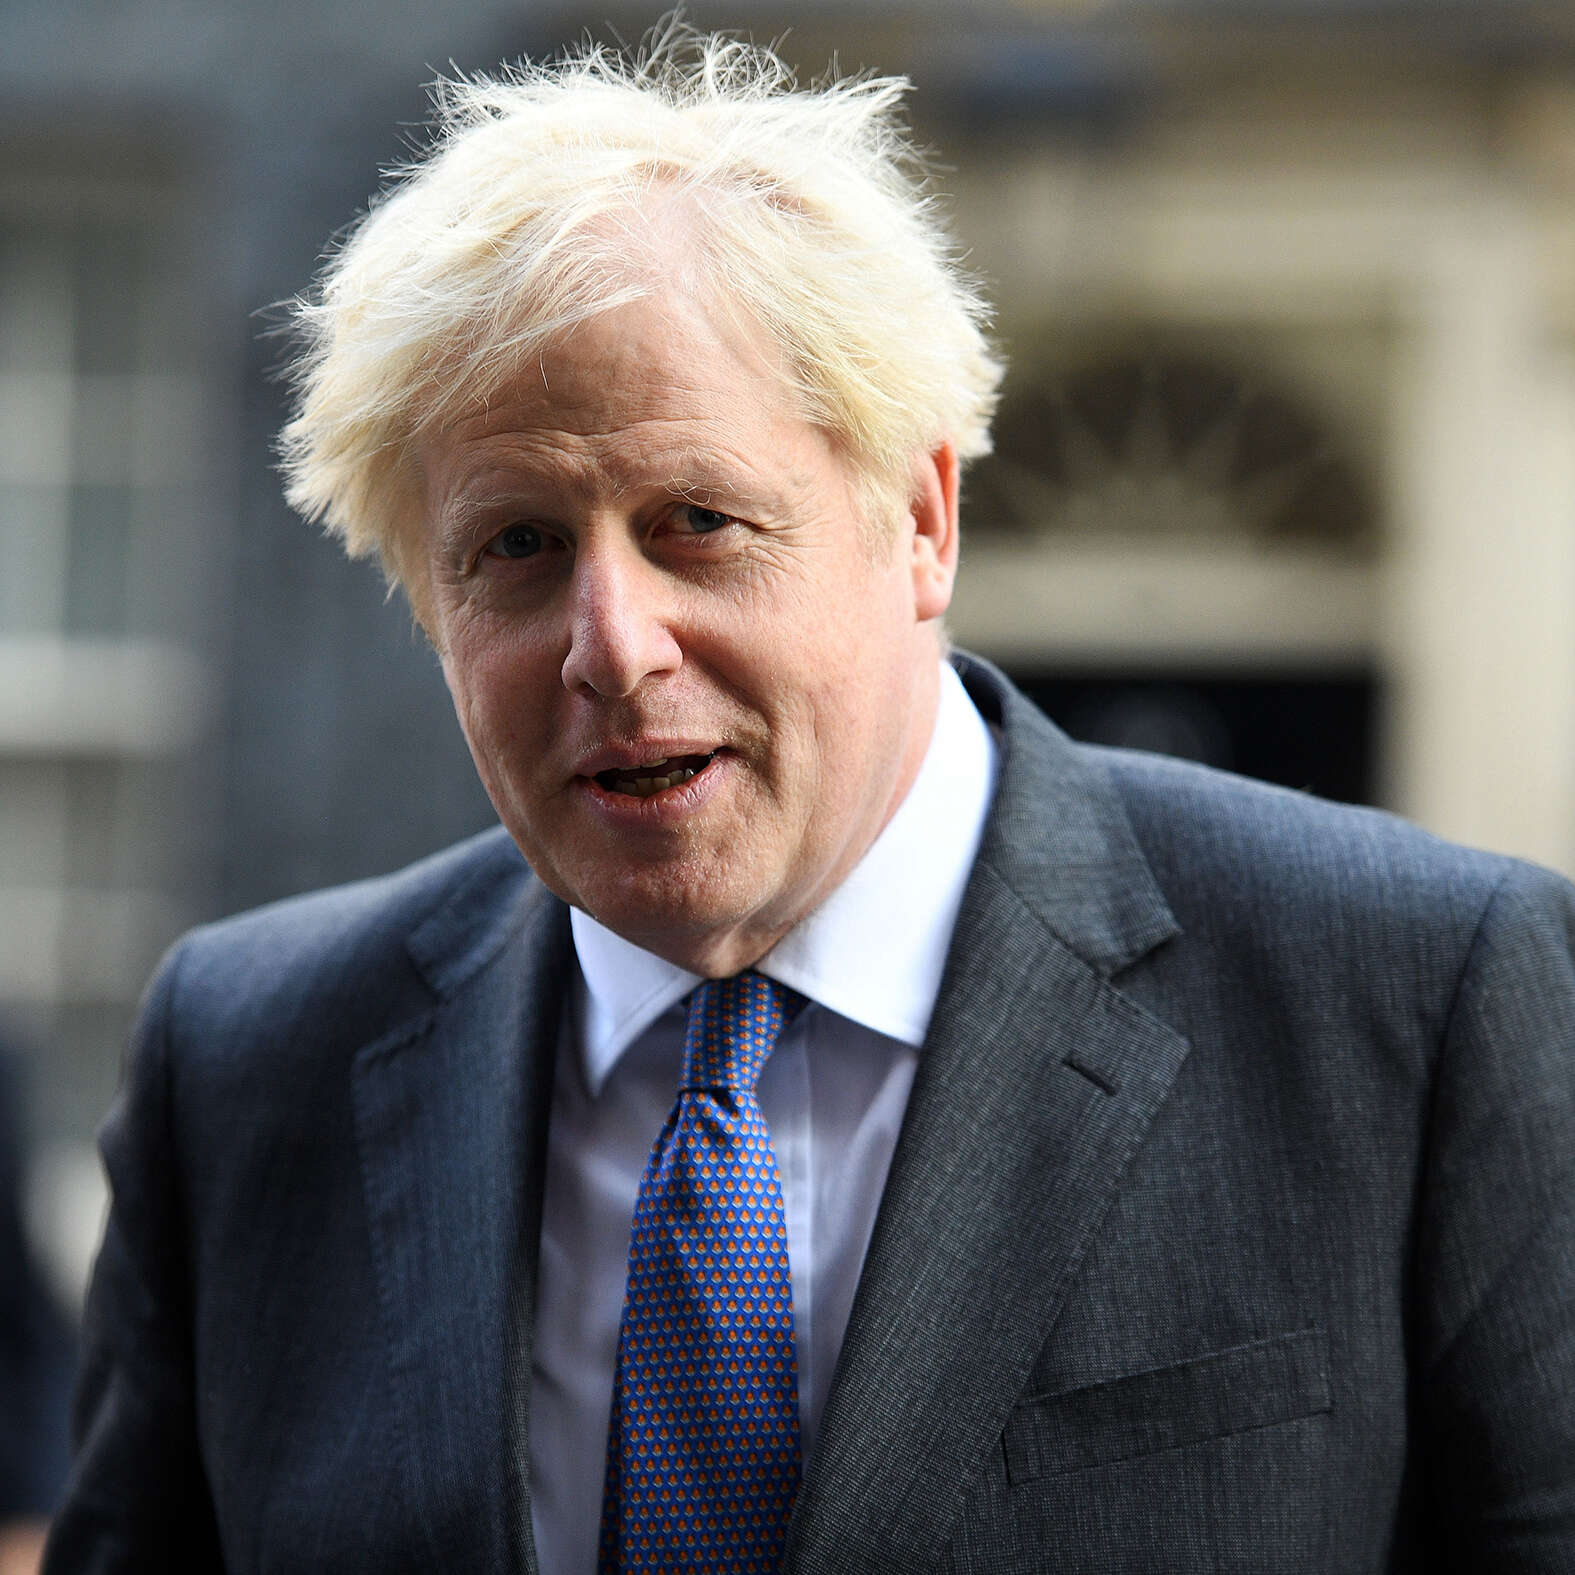 What does the police inquiry into “partygate” mean for Boris Johnson?